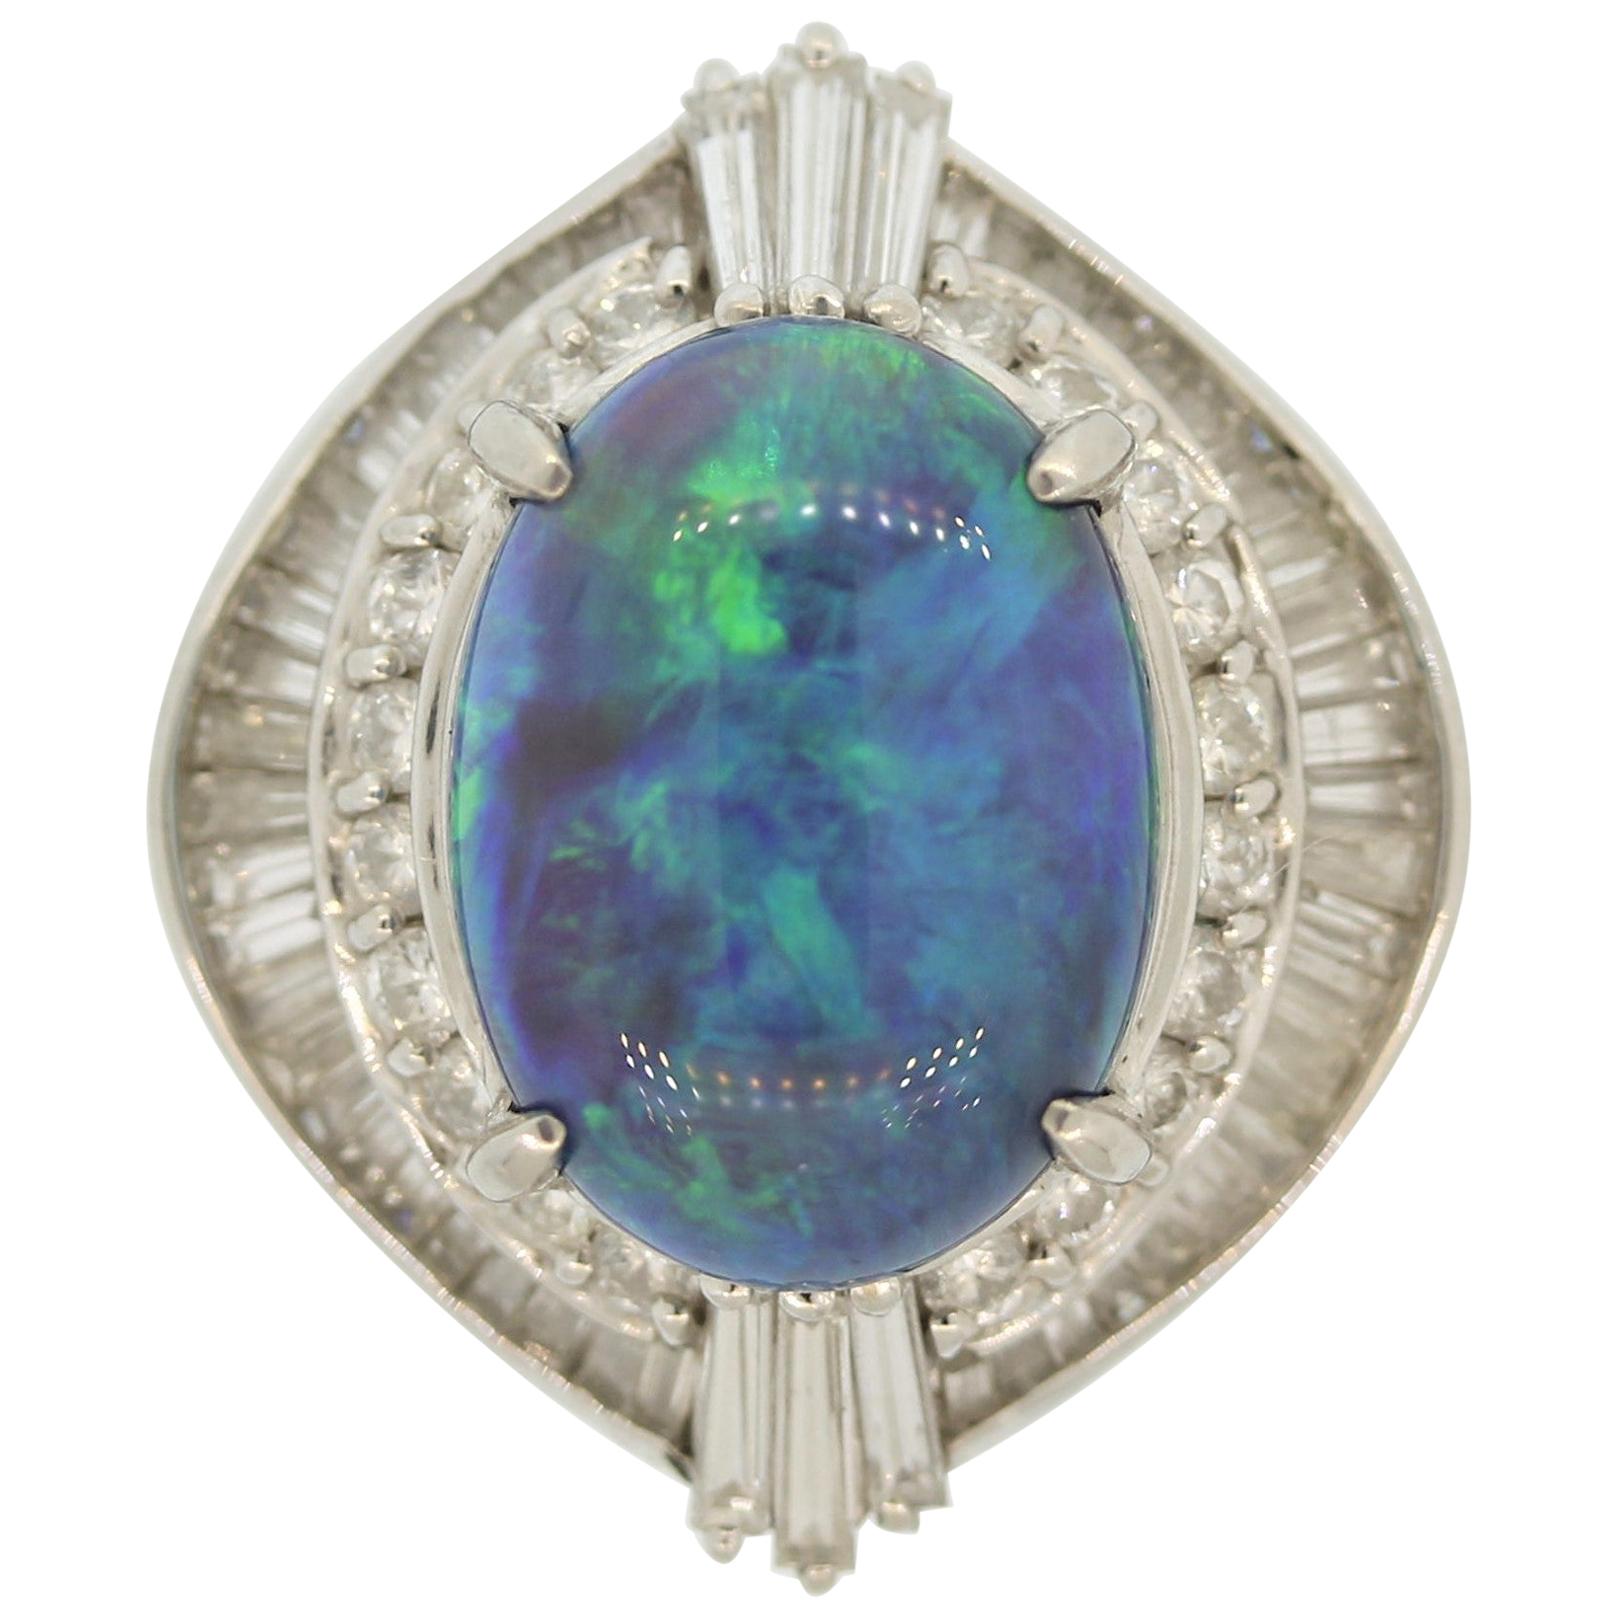 A classic Australian opal weighing 5.17 carats takes center stage. It has great play of color as the opal shows bright and strong flashes of blue and green across the entire stone. It is accented by 1.30 carats of round brilliant and baguette cut